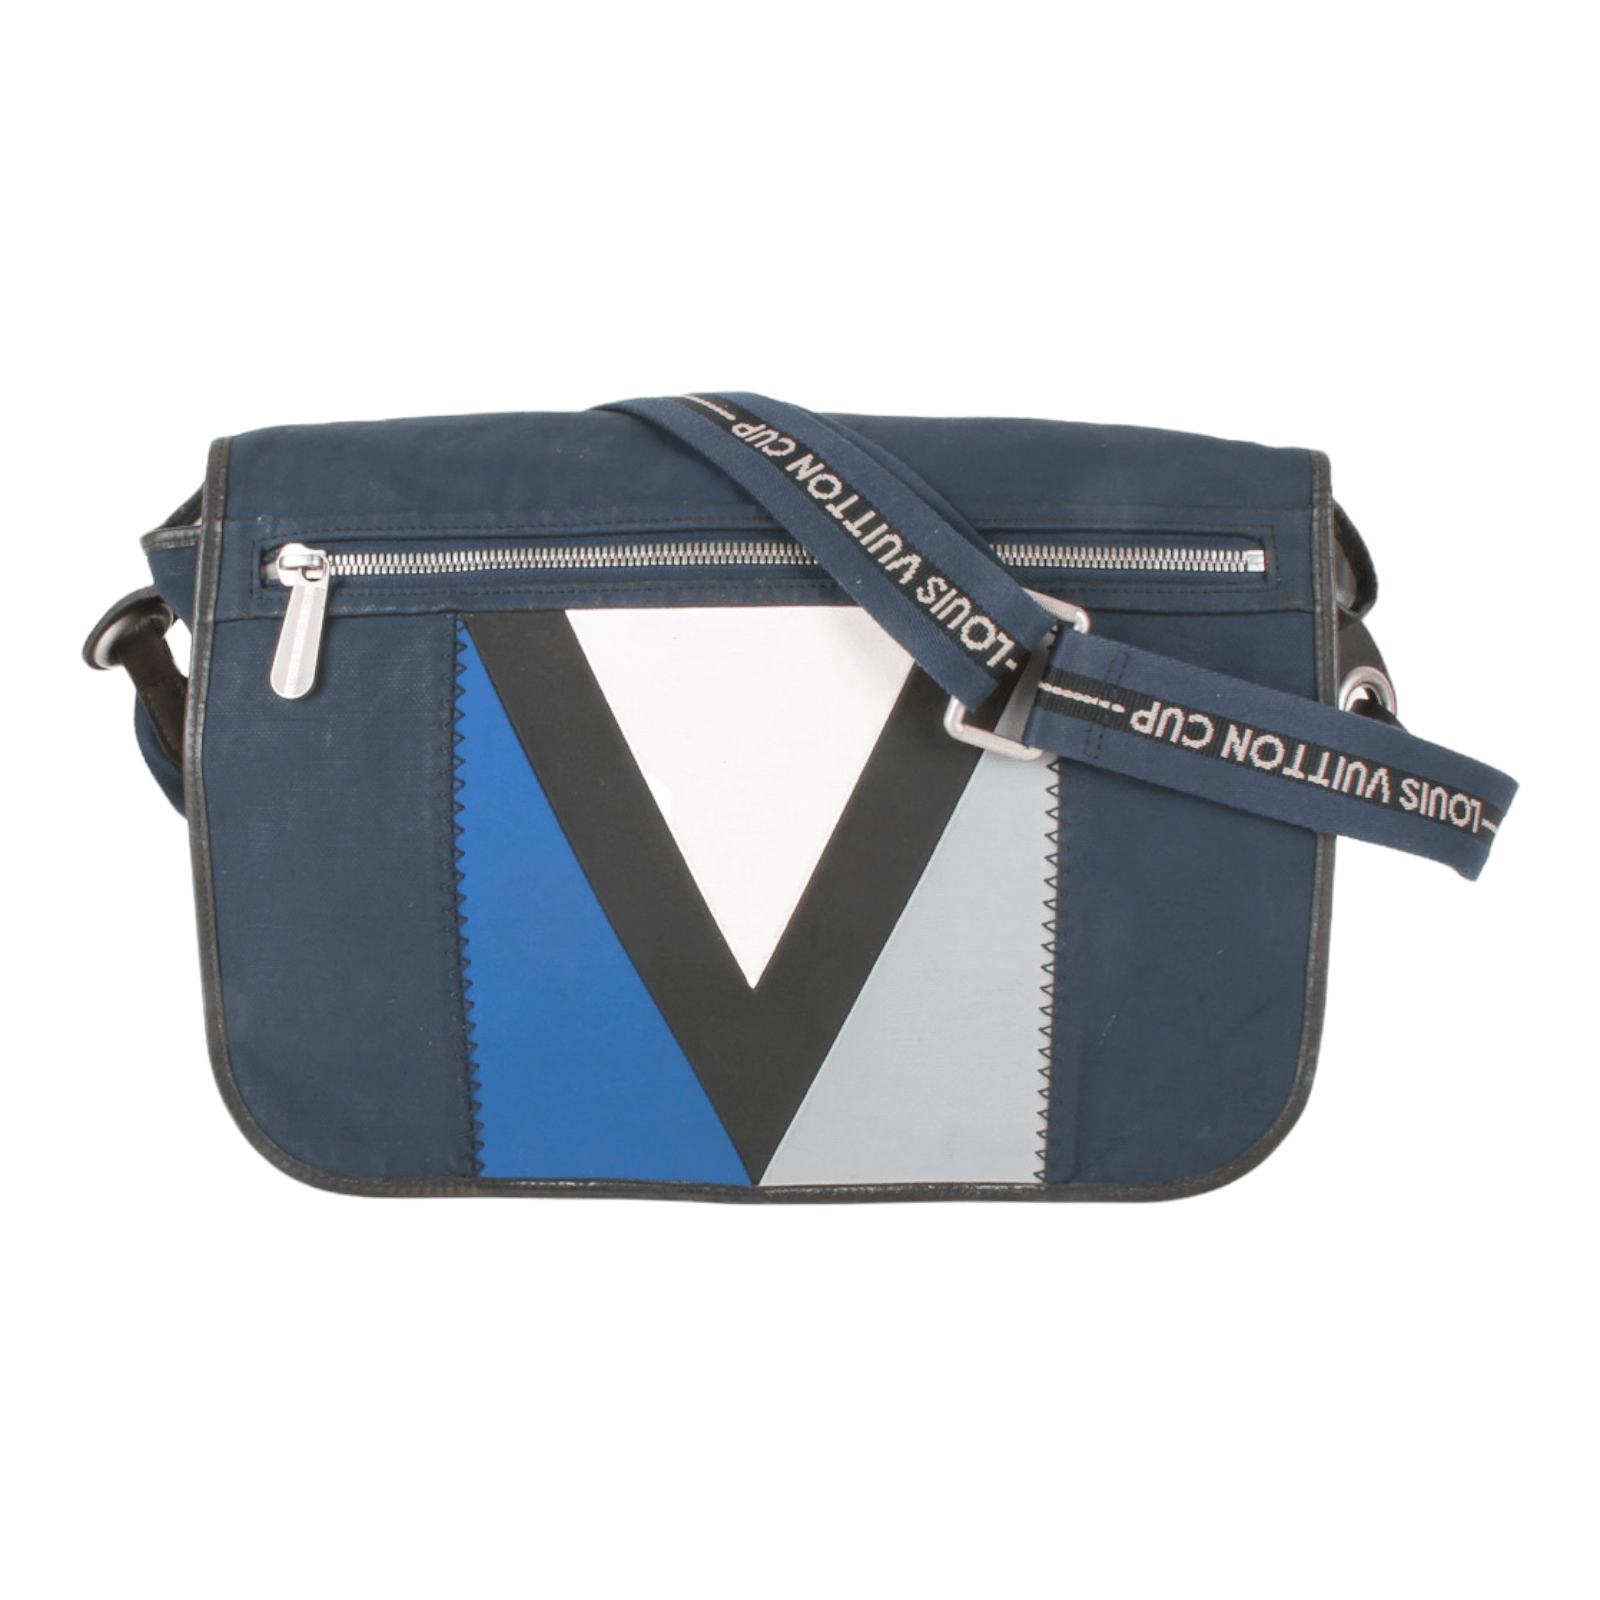 Louis Vuitton LV New Canvas Flap Shoulder Bag New Crossbody Bag from